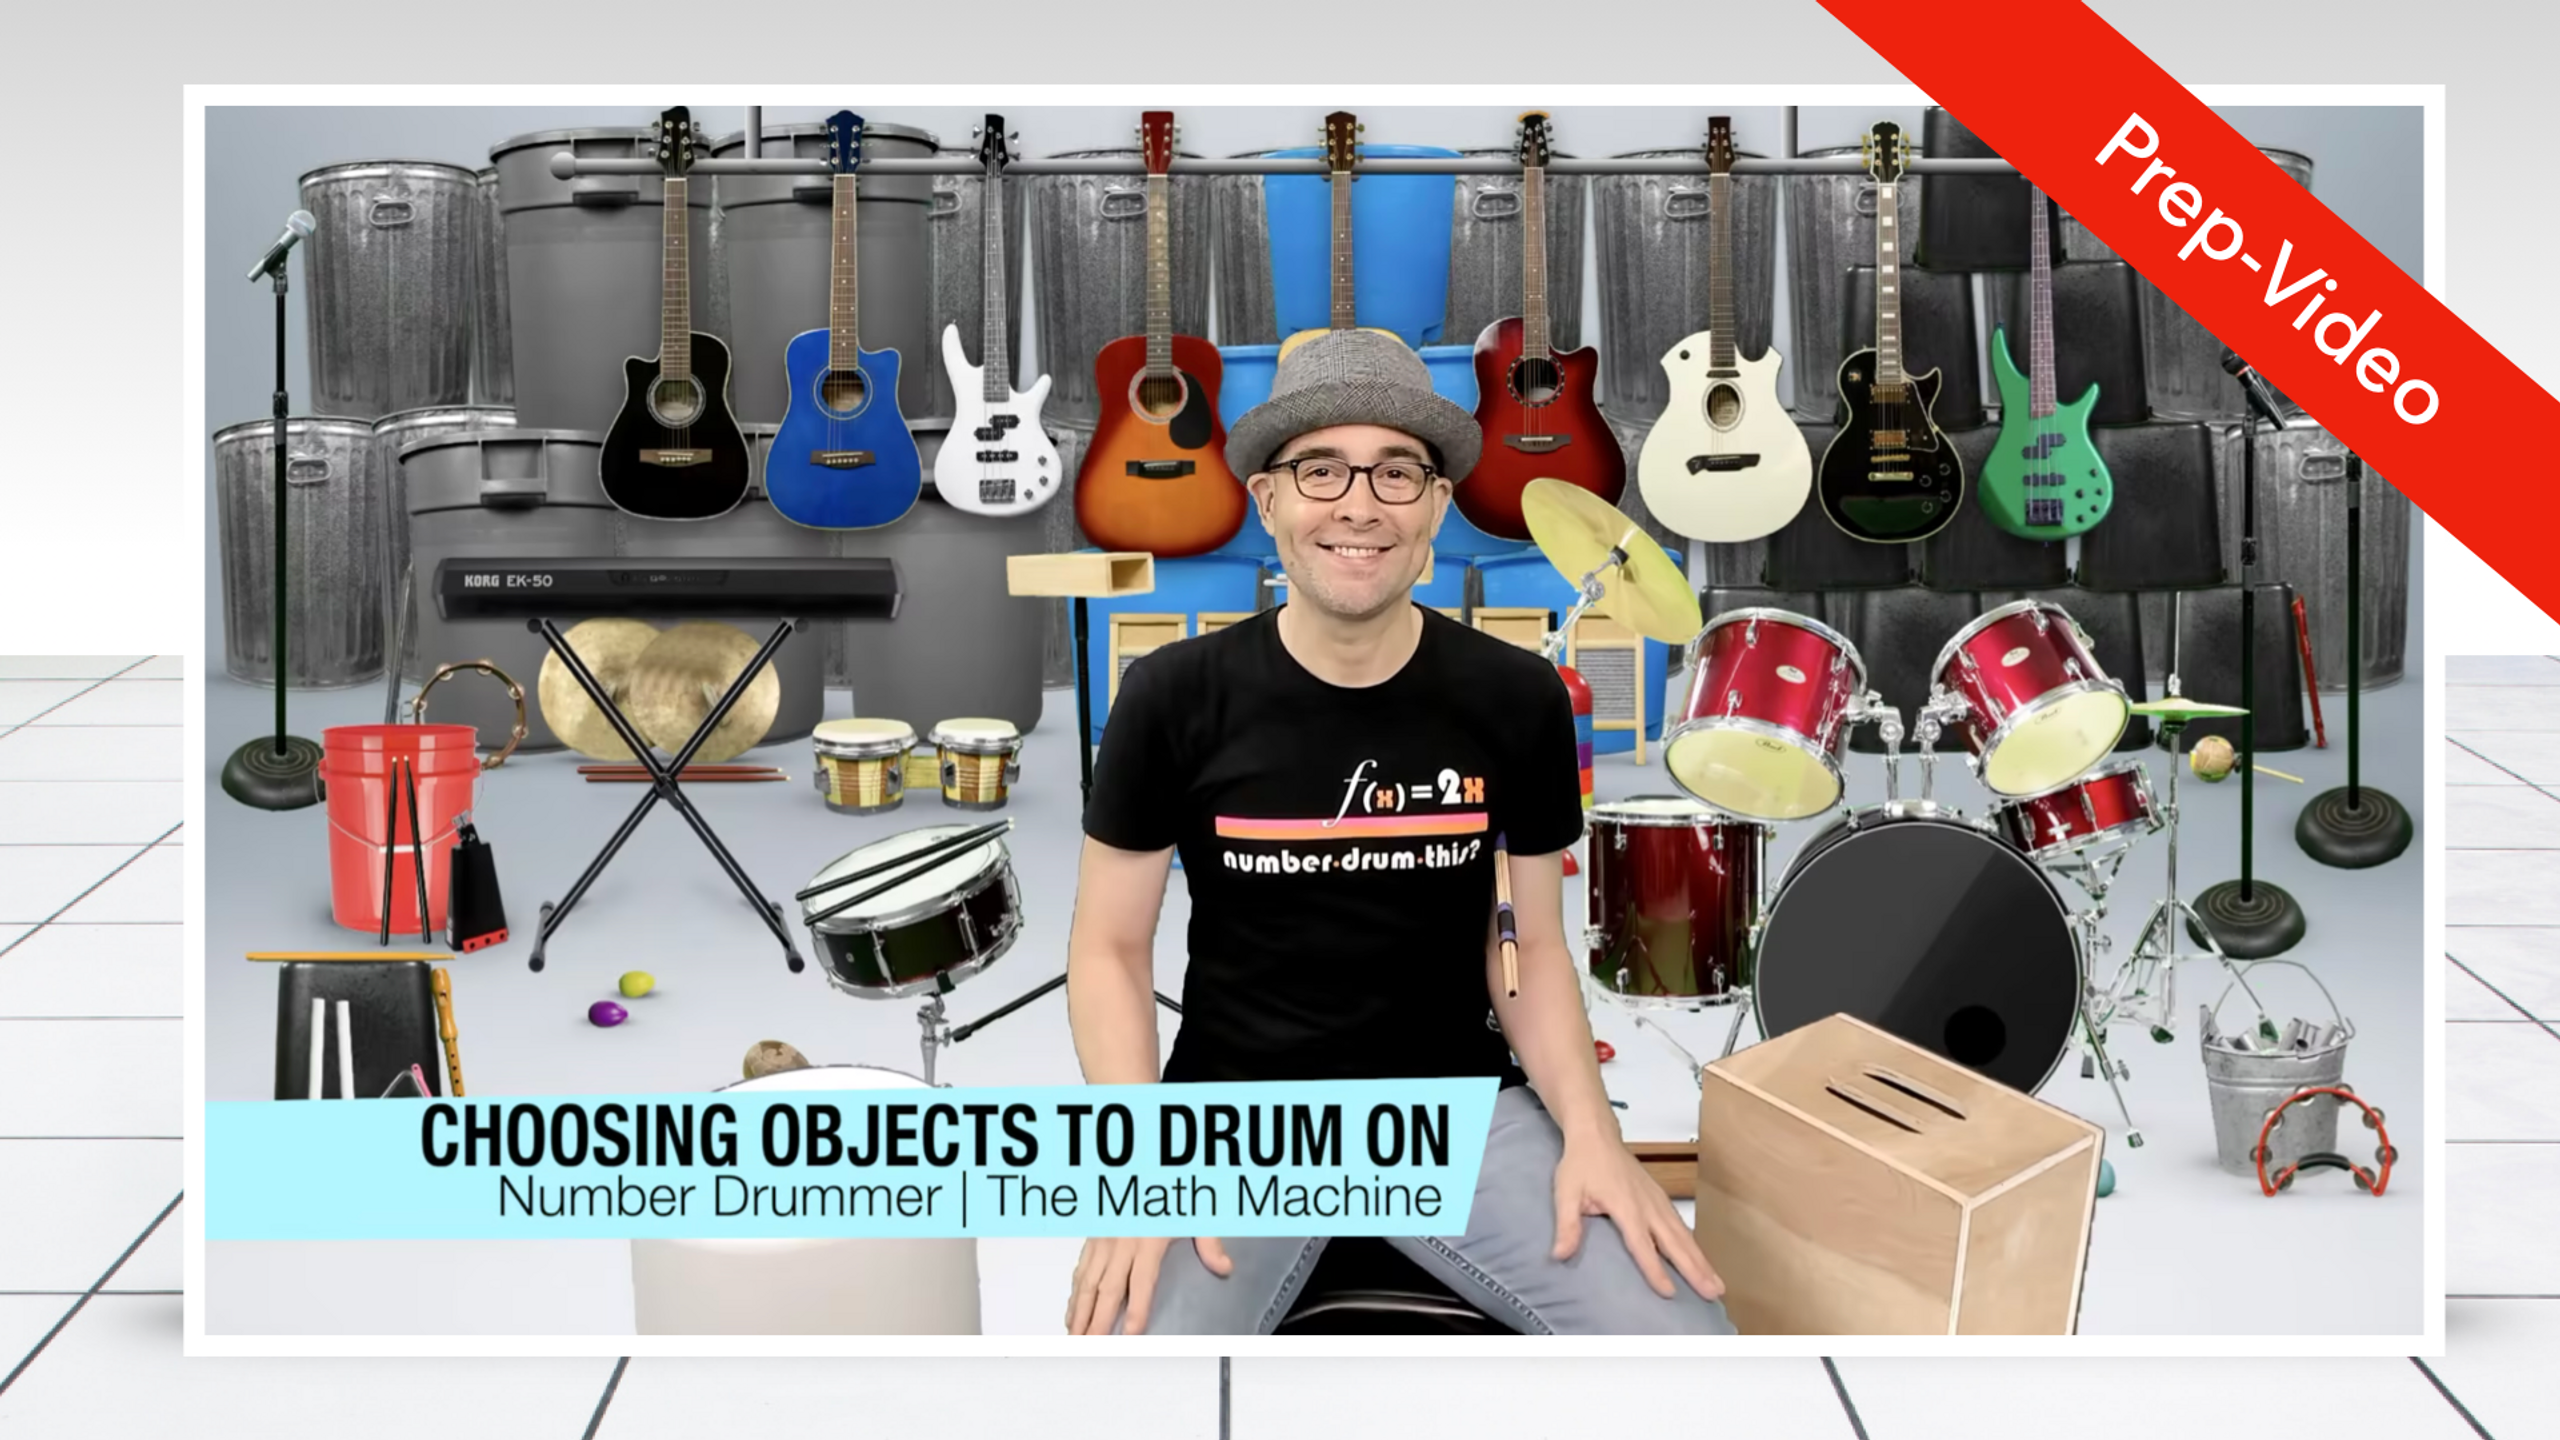 Number Drummer - Choosing Objects to Drum On